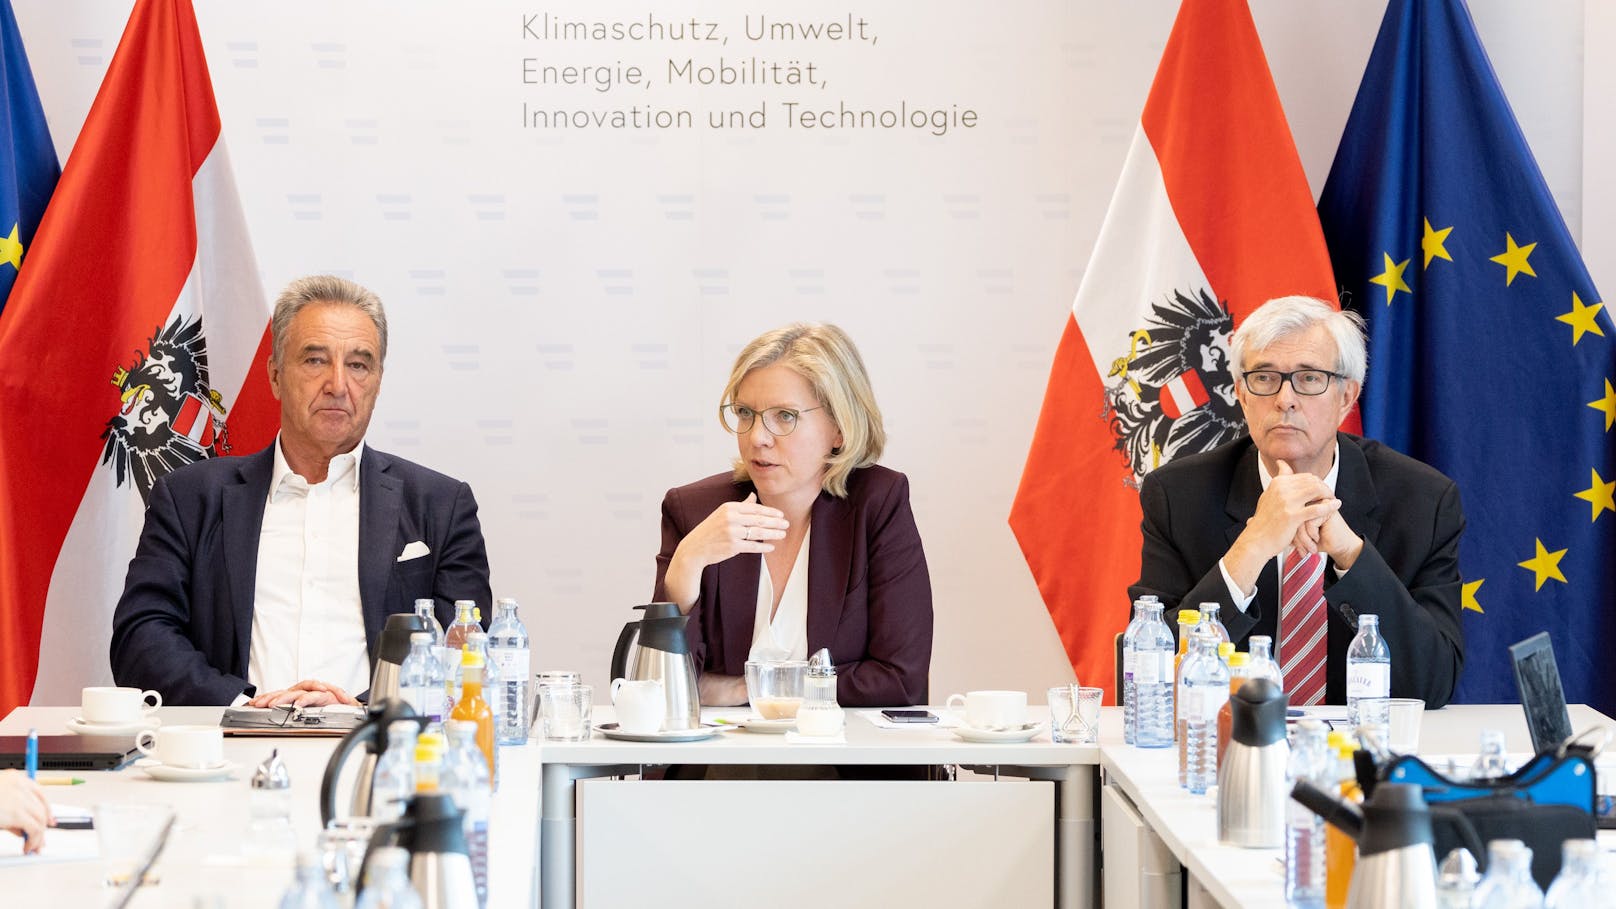 Energieexperte <strong>Gerhard Roiss</strong>, Bundesministerin <strong>Leonore Gewessler</strong>, Energieexperte <strong>Walter Boltz</strong>